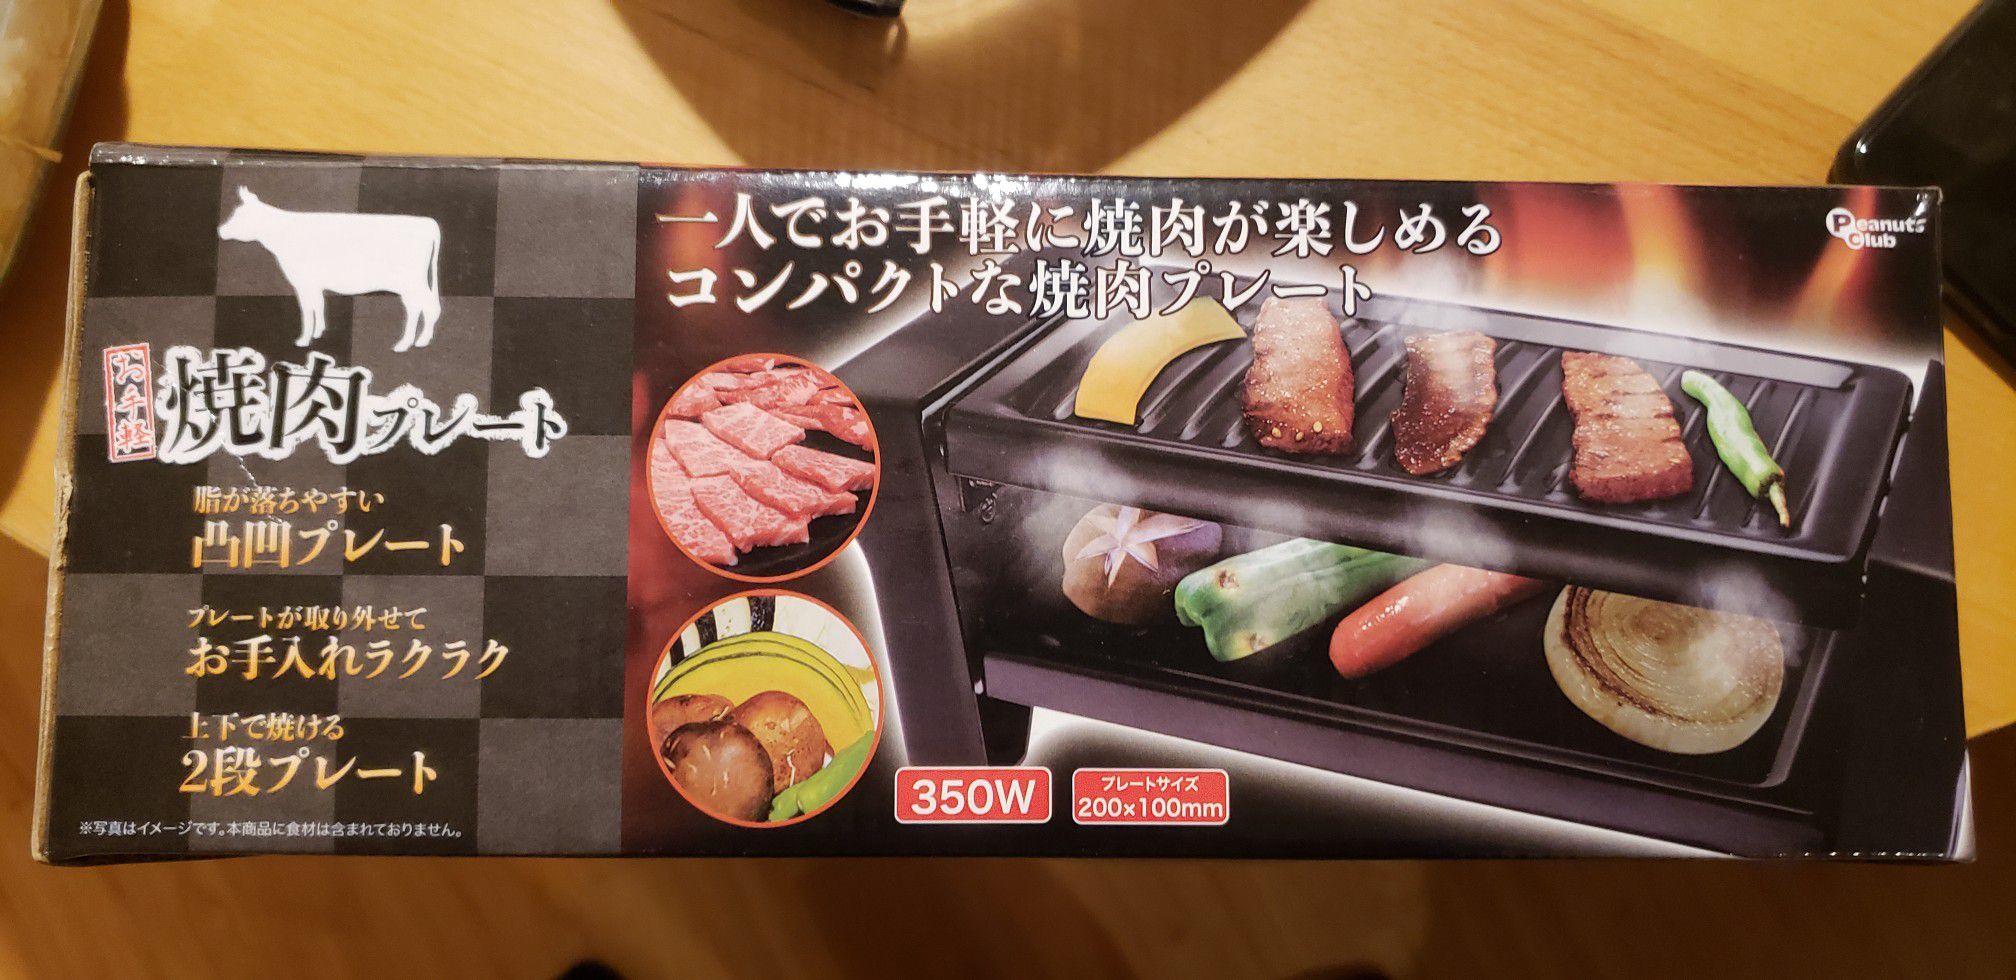 Small Japanese electric Grill